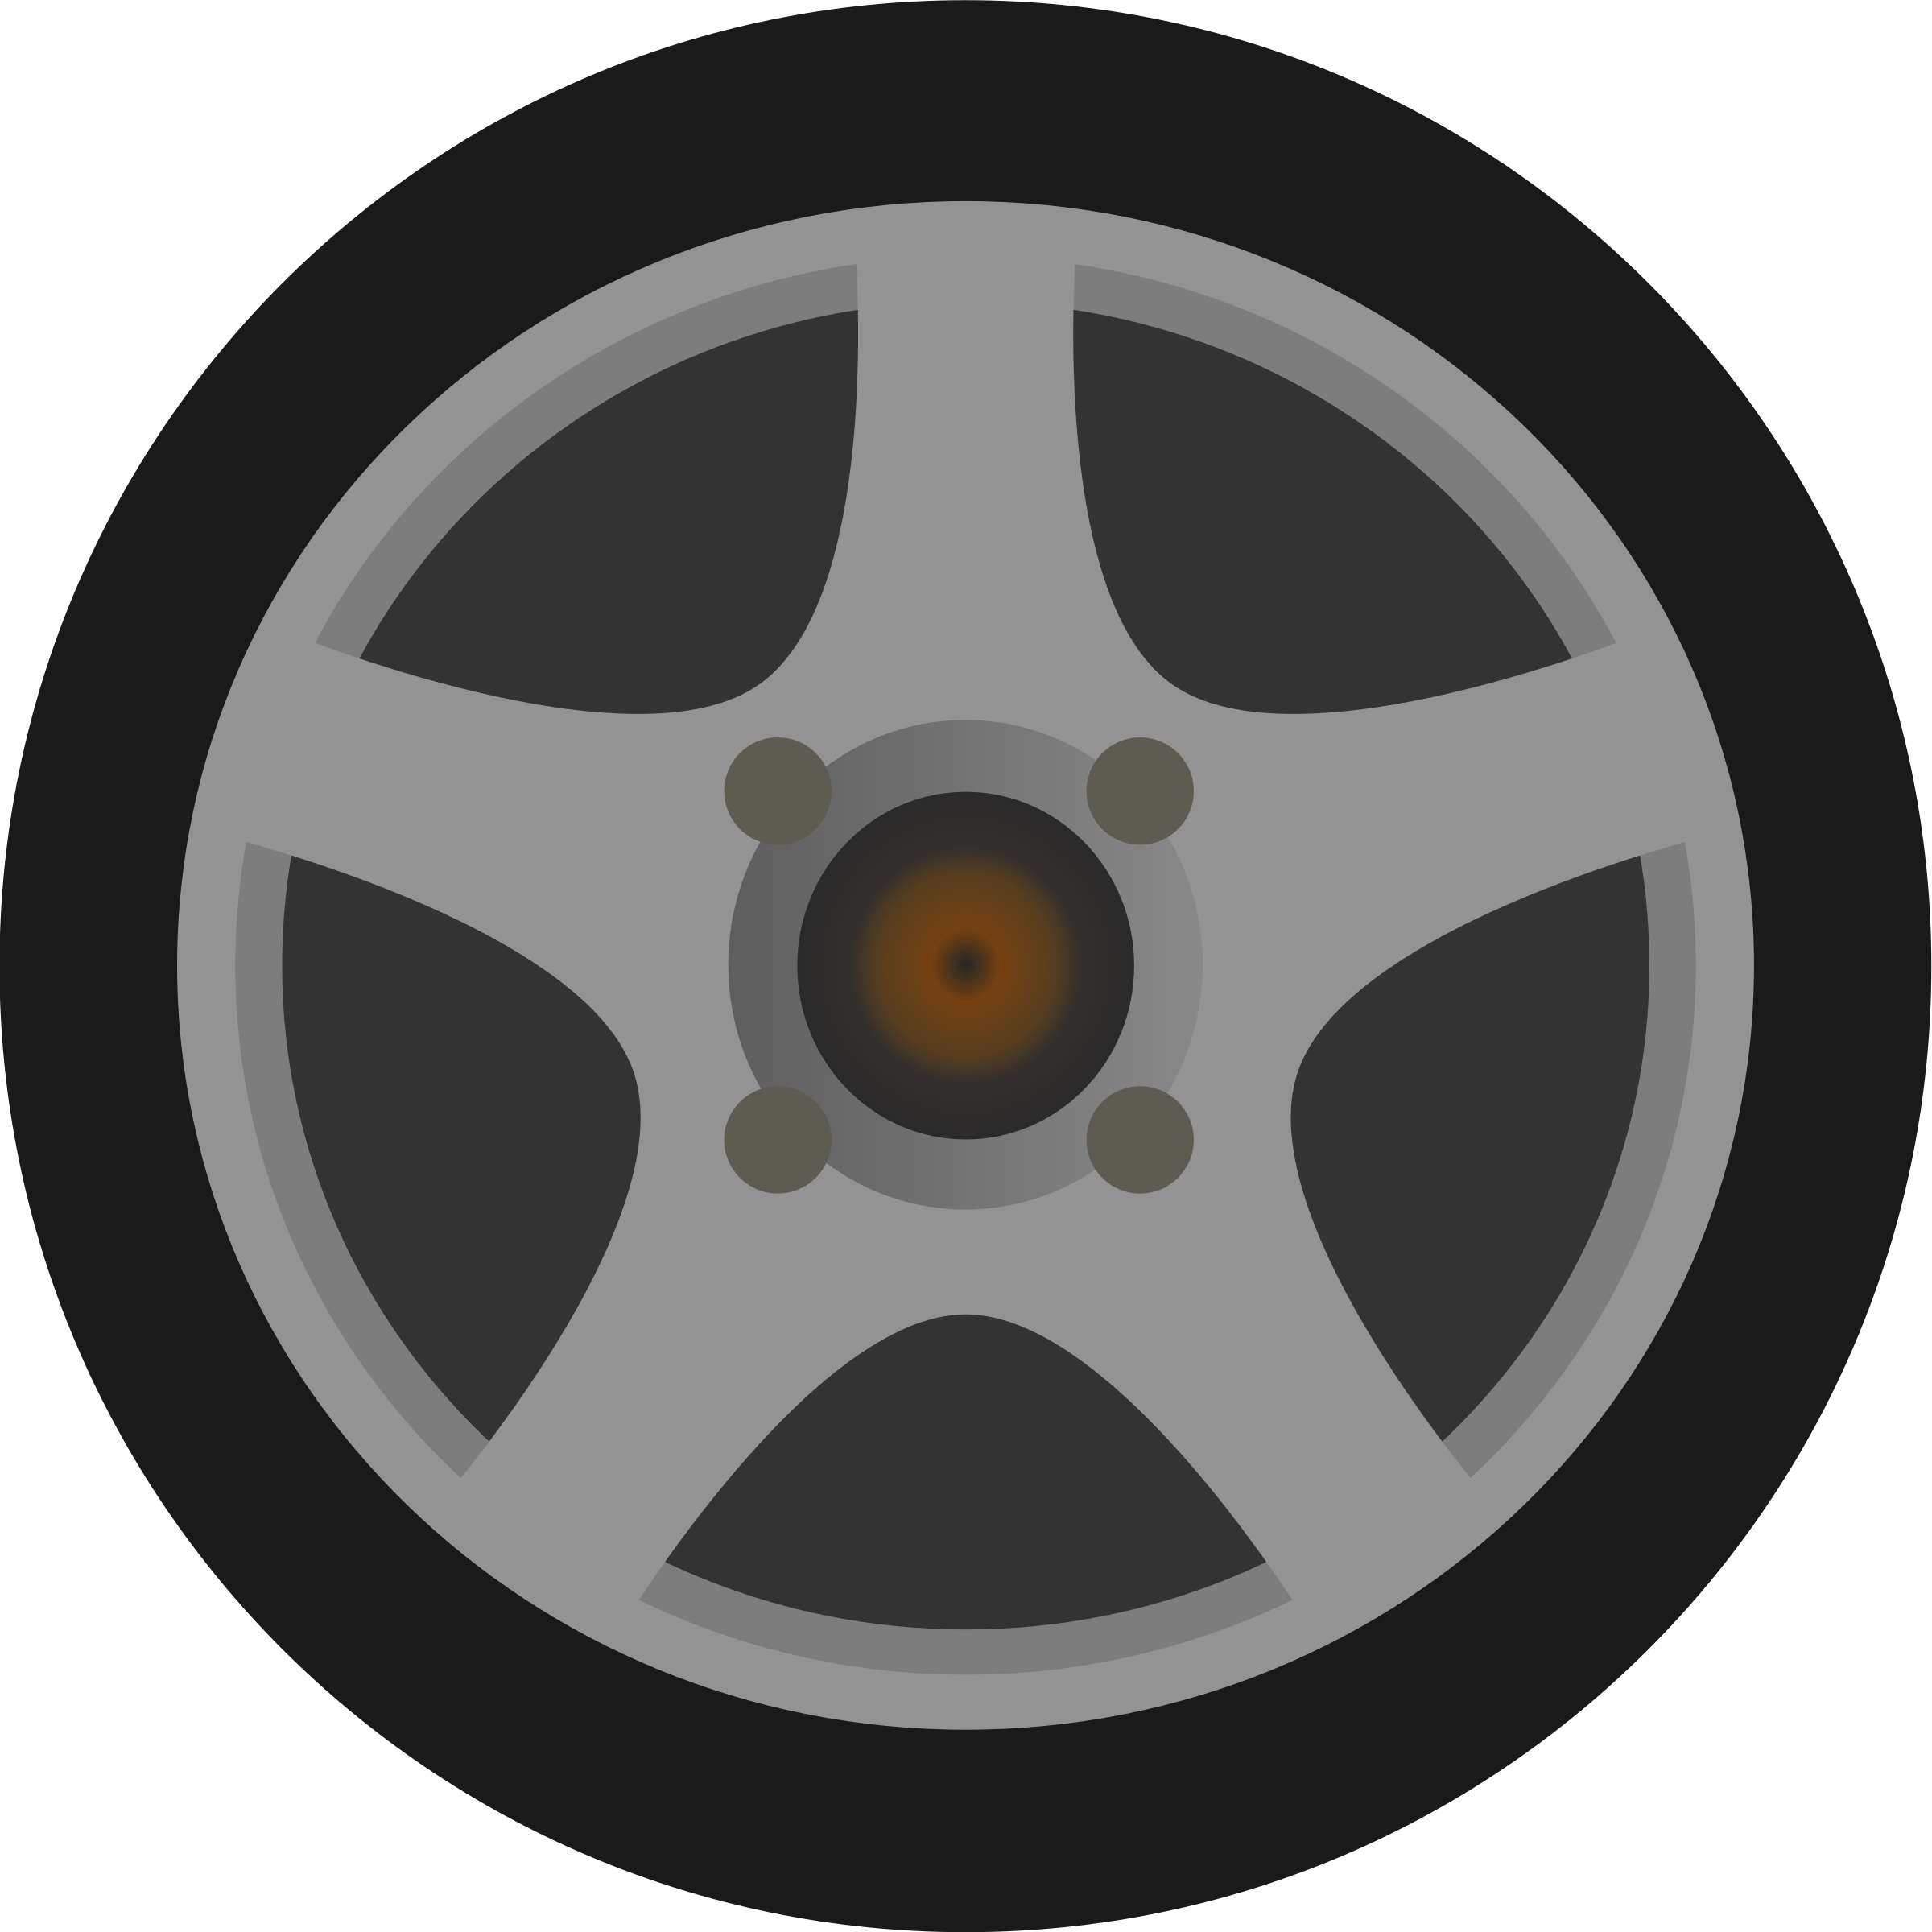 Simple Car Wheel Tire Side View By Qubodup